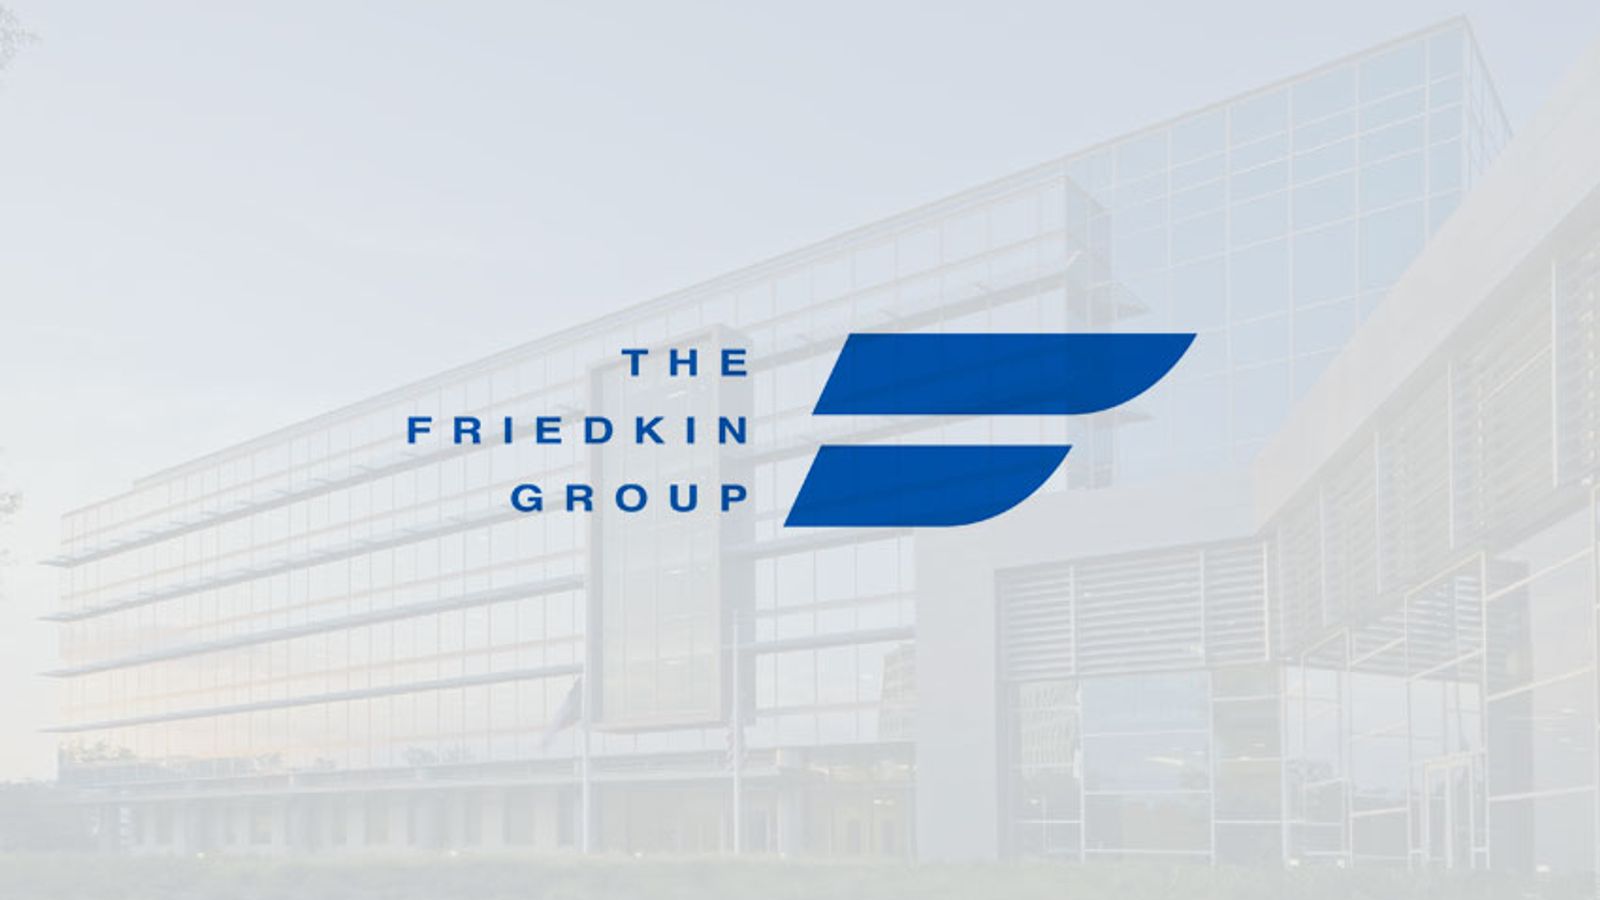 The Friedkin Group case study